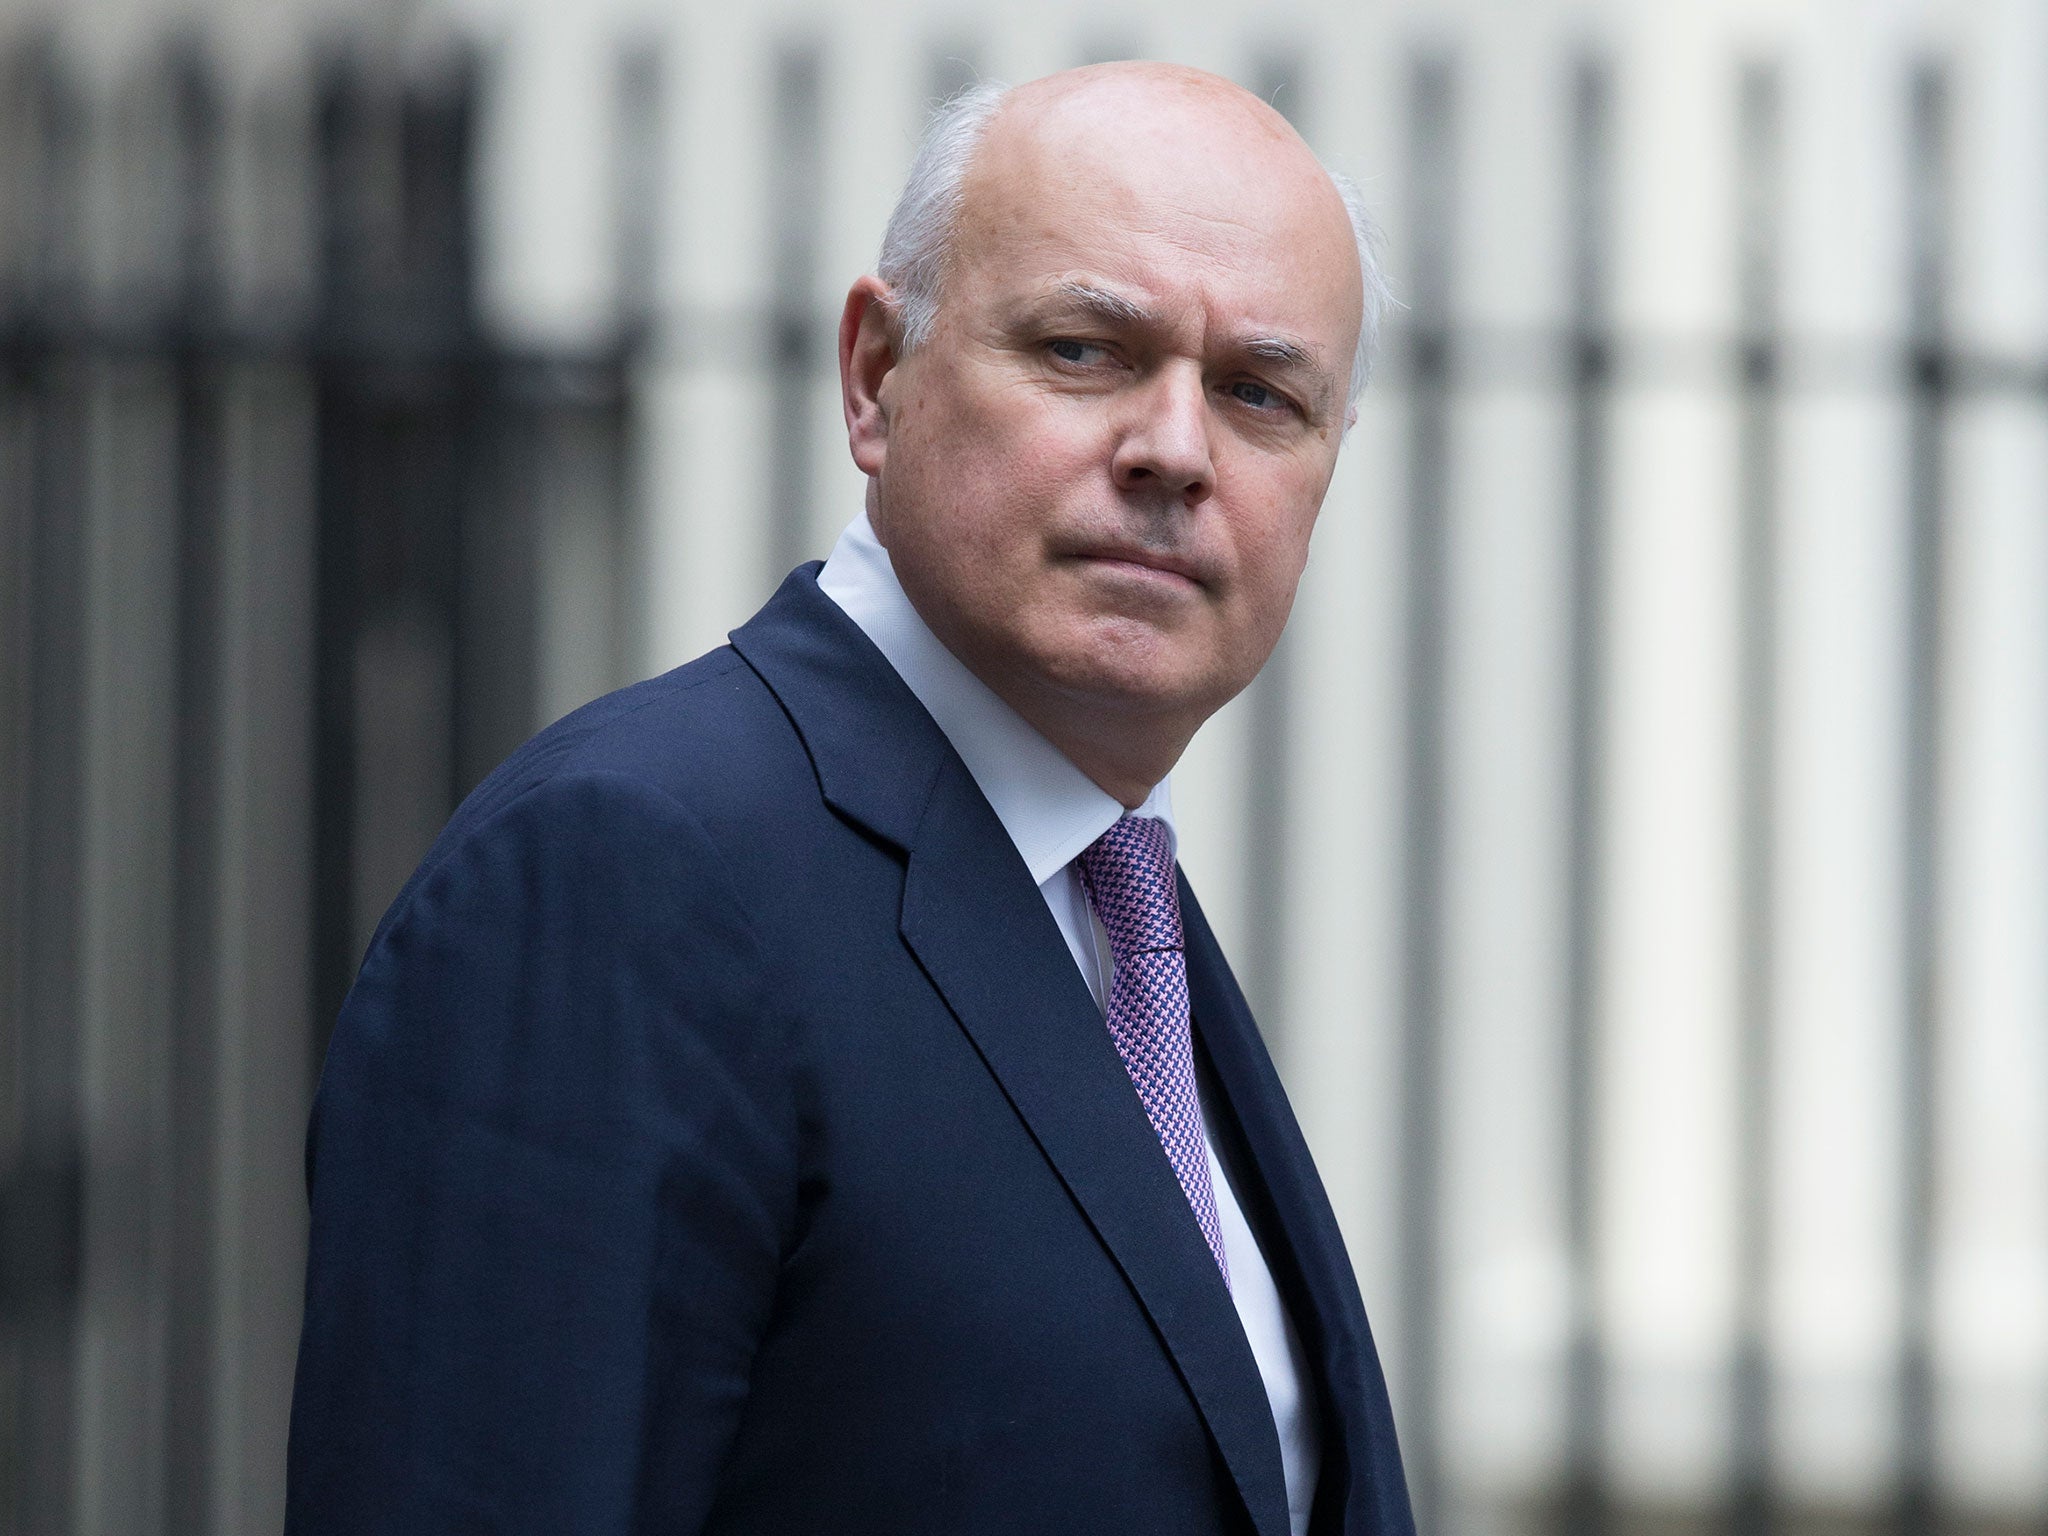 Iain Duncan Smith submitted six bland paragraphs